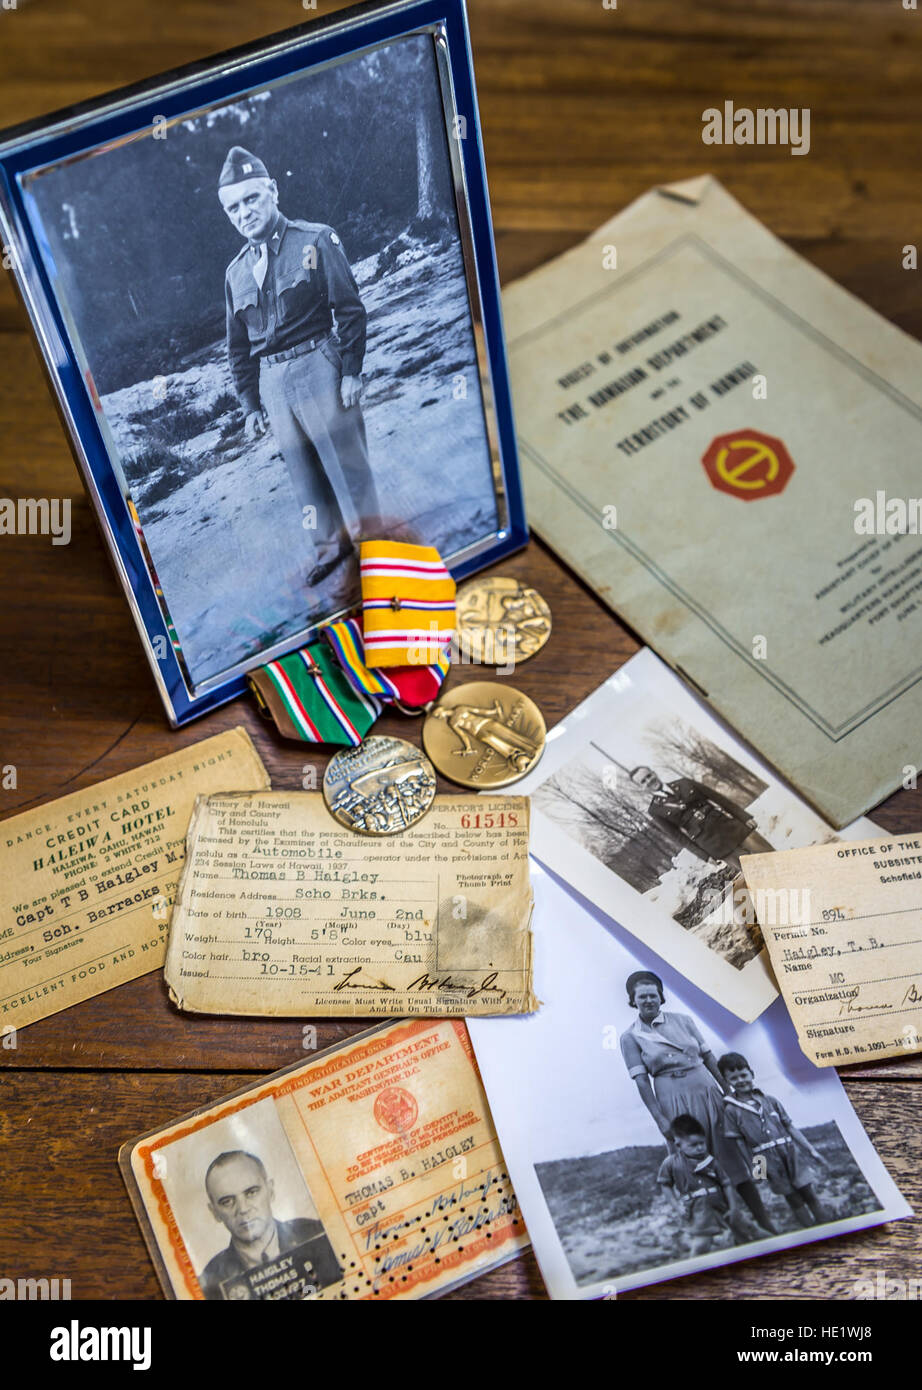 Thomas Brien Haigley Jr., 79, displays his collection of photos, medals and other effects that belonged to father, Thomas Brien Haigley Sr. Haigley Sr. was a captain and doctor in the U.S. Army Medical Corps, had left his son on the porch of their home, near Generals Loop at neighboring Schofield Barracks, to report to the base hospital during the Japanese attack on Dec 7, 1941. From there he was sent to the mess hall at Wheeler Field. The building, which stands little changed today, was directly across the street from where a Japanese bomb had torn through the roof of Hanger 3, igniting stack Stock Photo